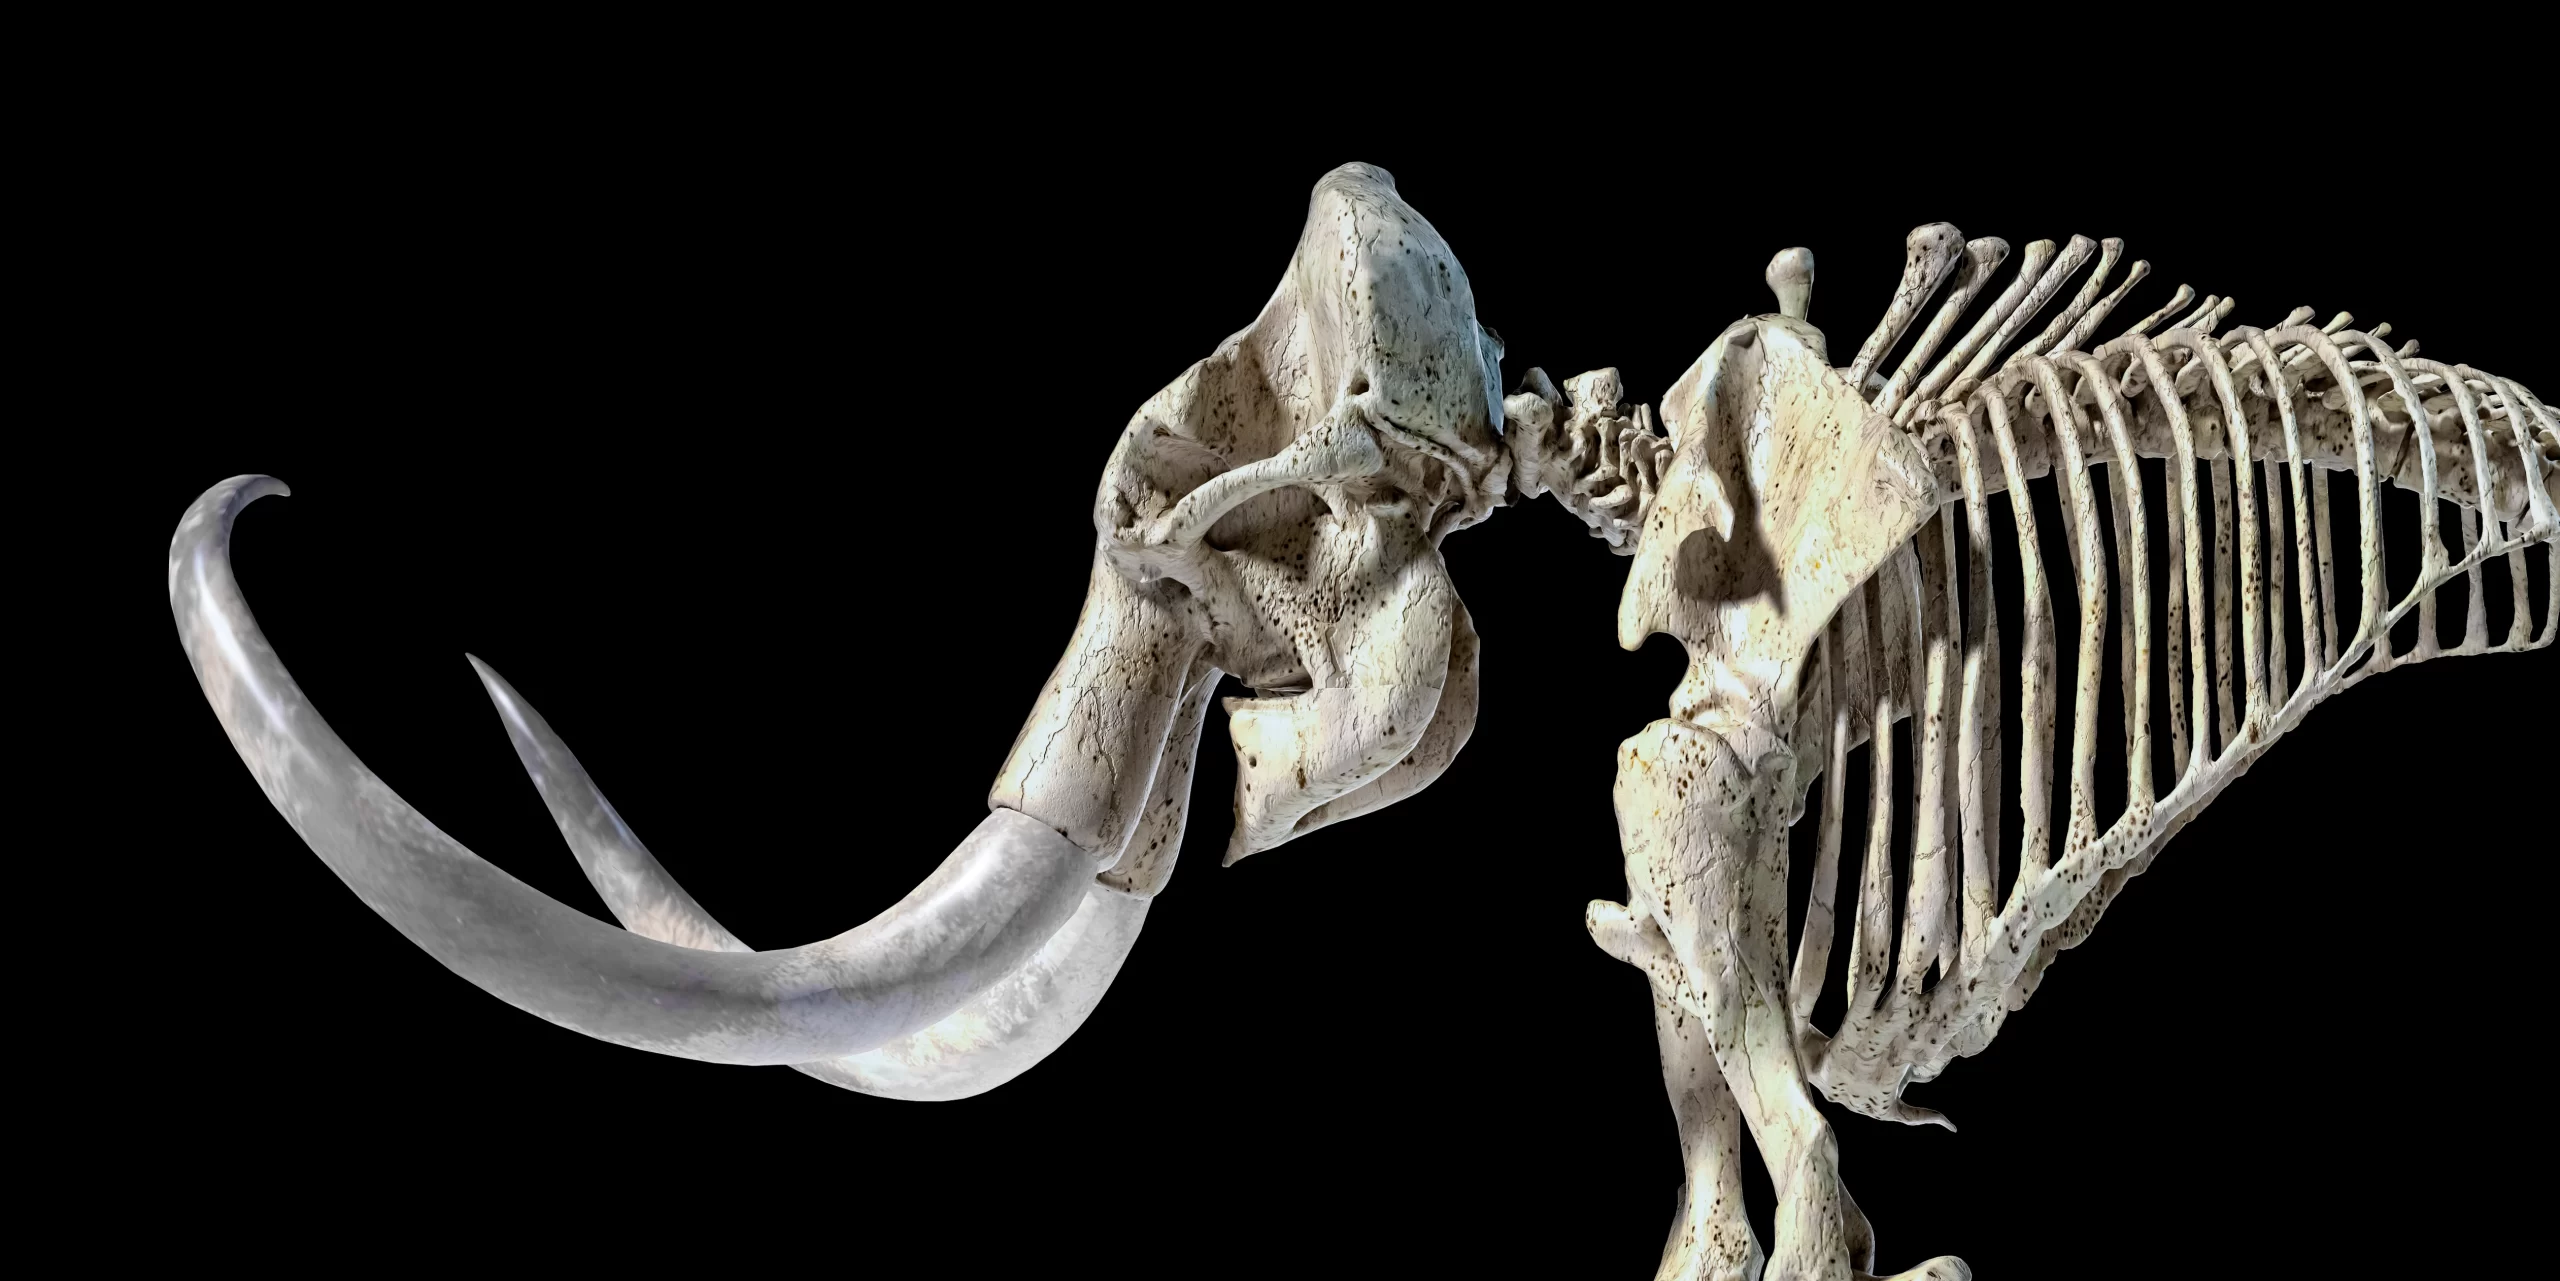 A skeleton of the extinct woolly mammoth.